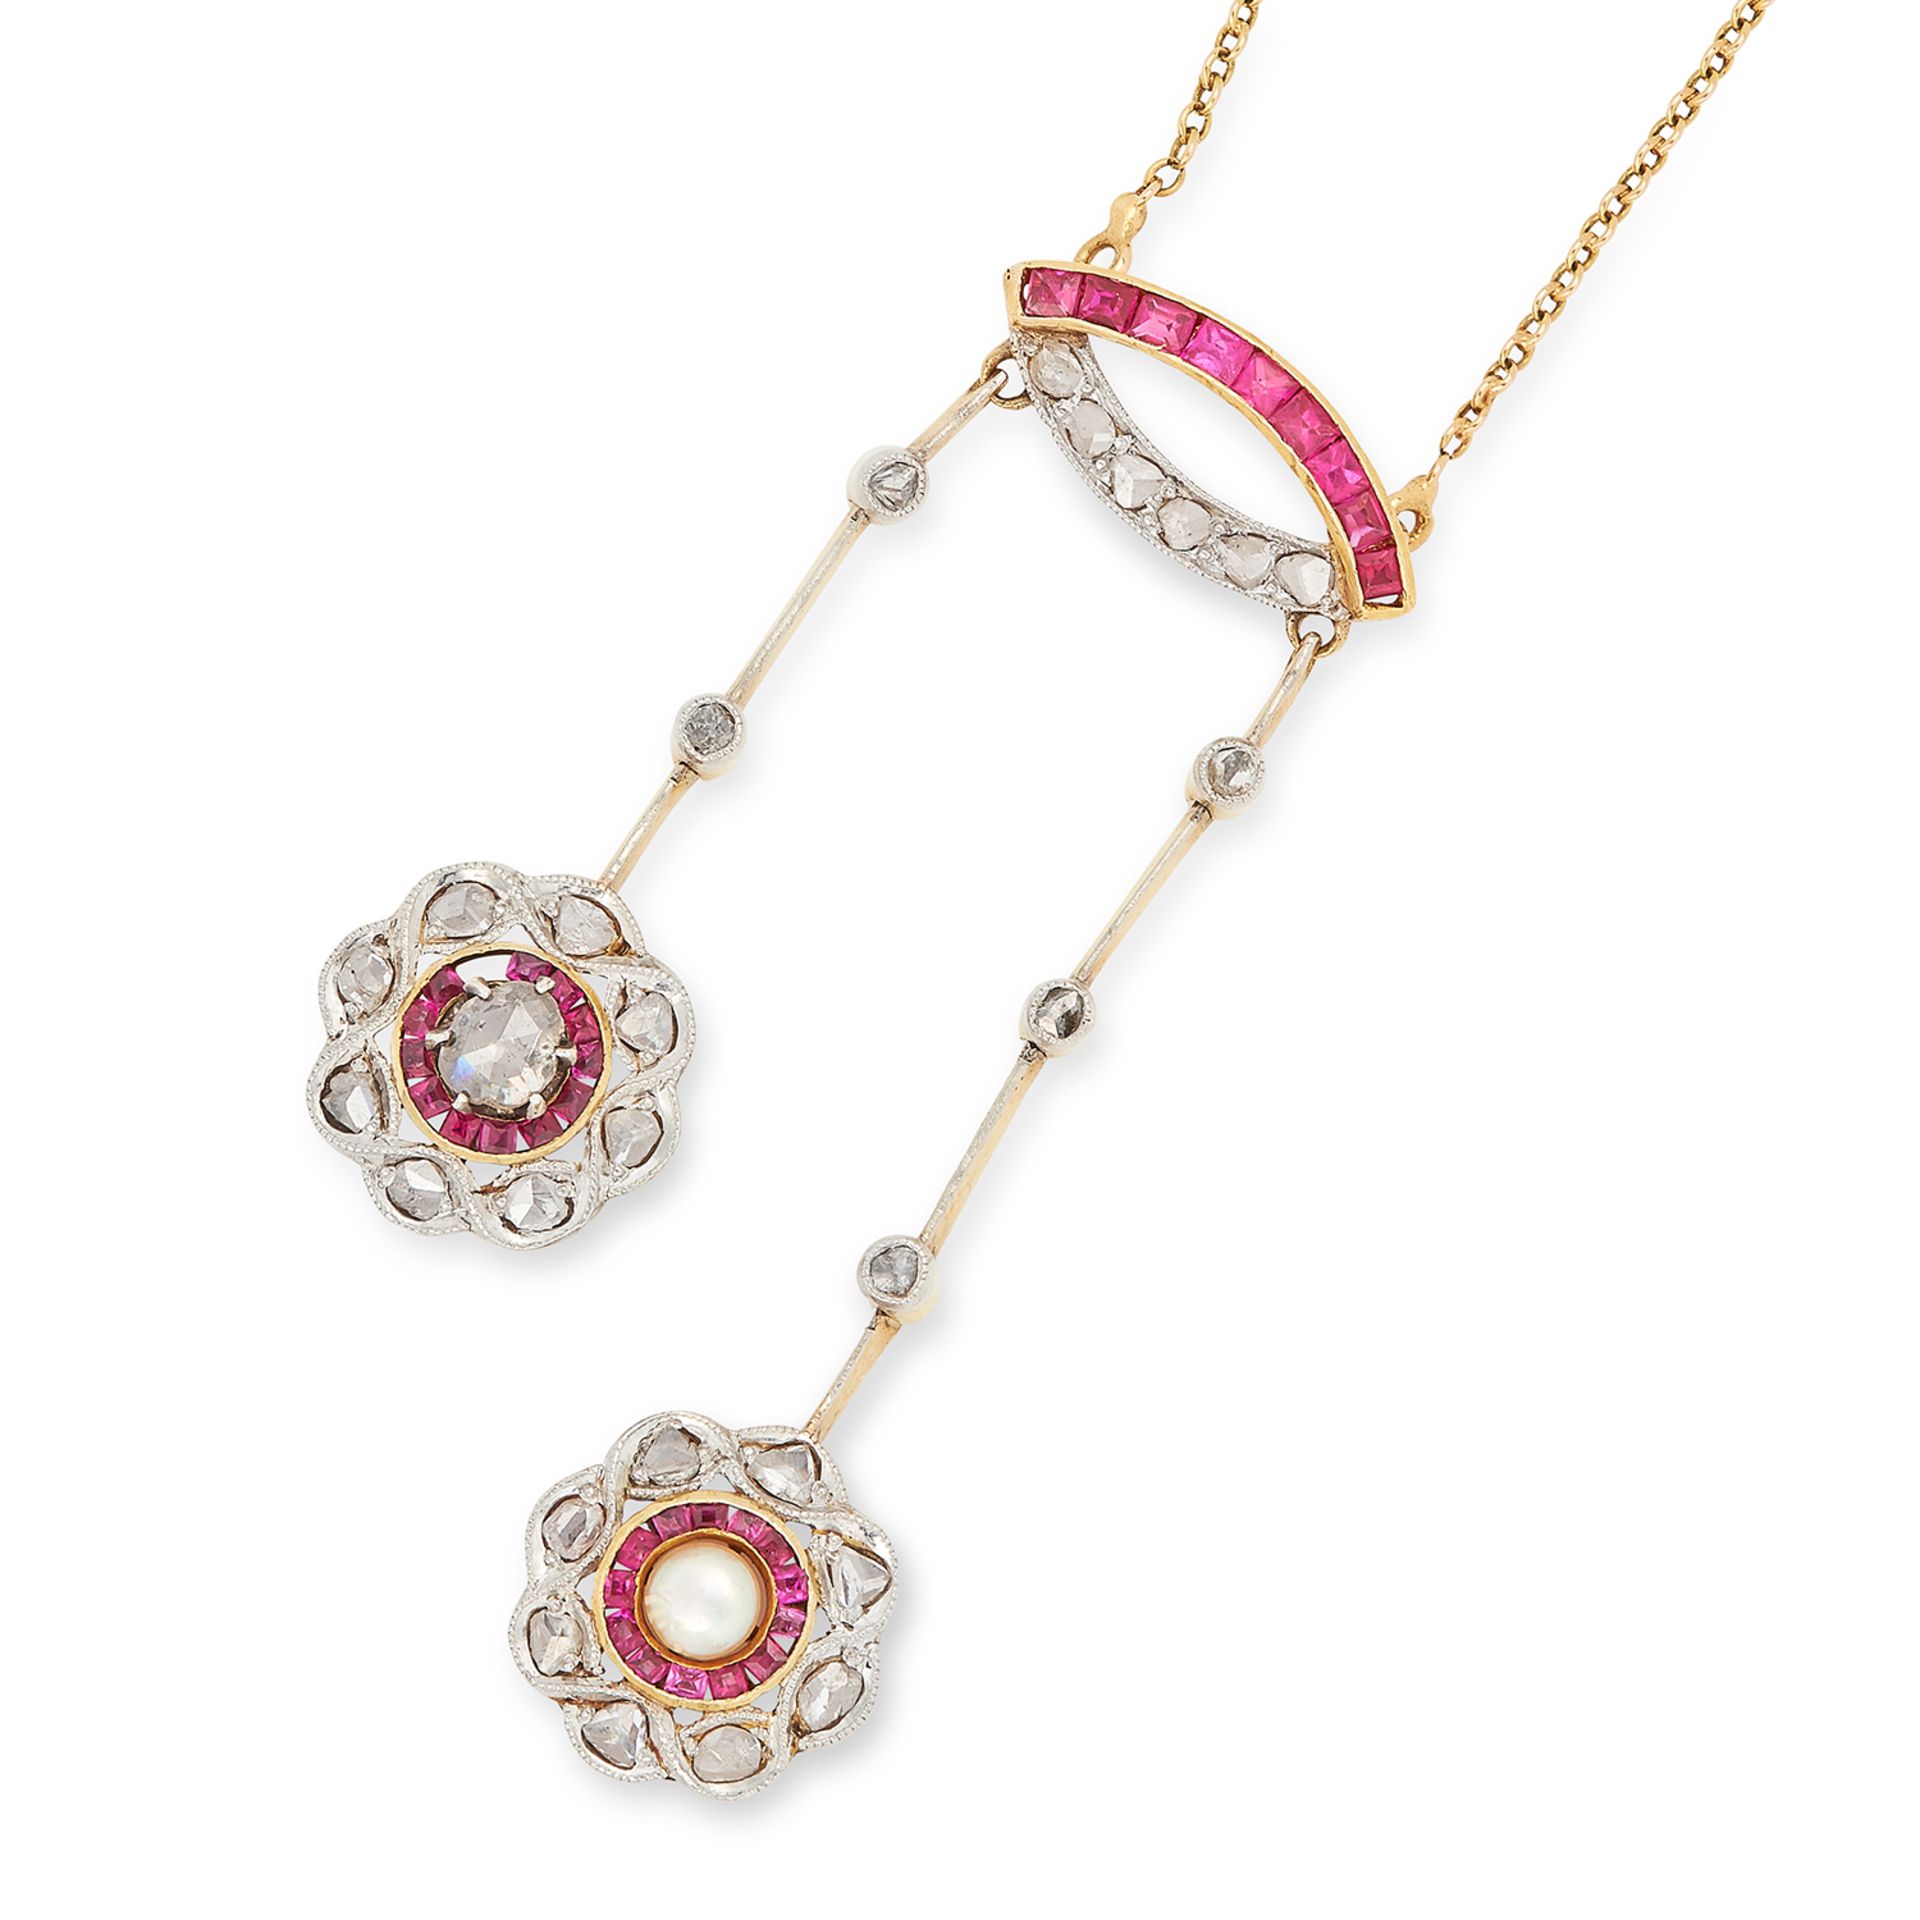 ANTIQUE RUBY, DIAMOND AND PEARL PENDANT set with step cut rubies, rose cut diamonds and a pearl, 6.